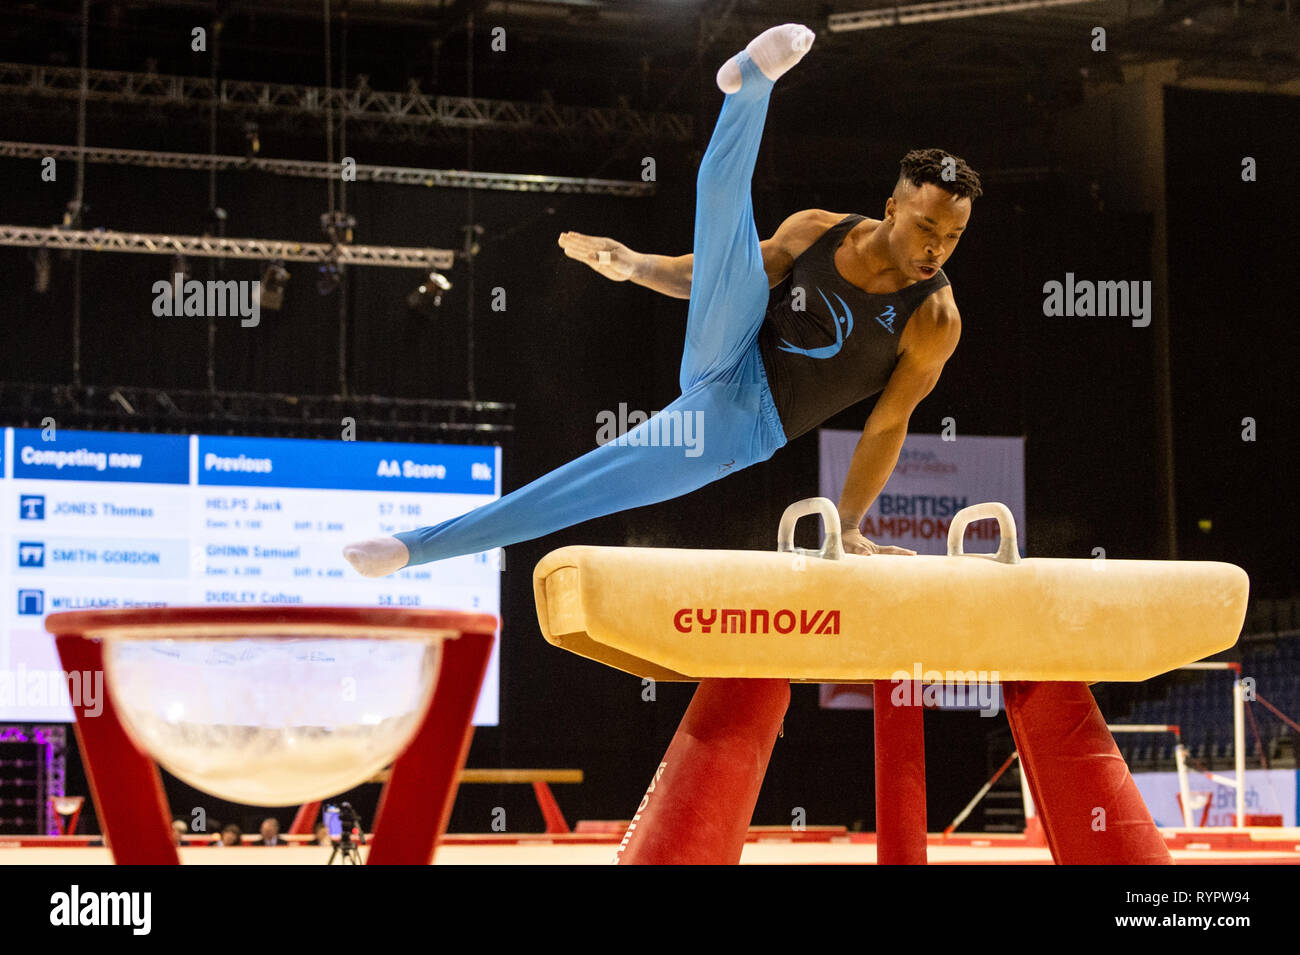 Liverpool, UK. 14th March 2019. Raekwon Baptiste (Notts) competing on Pommel Horse during the Men’s and Women’s Artistic British Championships at the M & S Bank Arena, Liverpool, UK. Credit: Iain Scott Photography/Alamy Live News Stock Photo